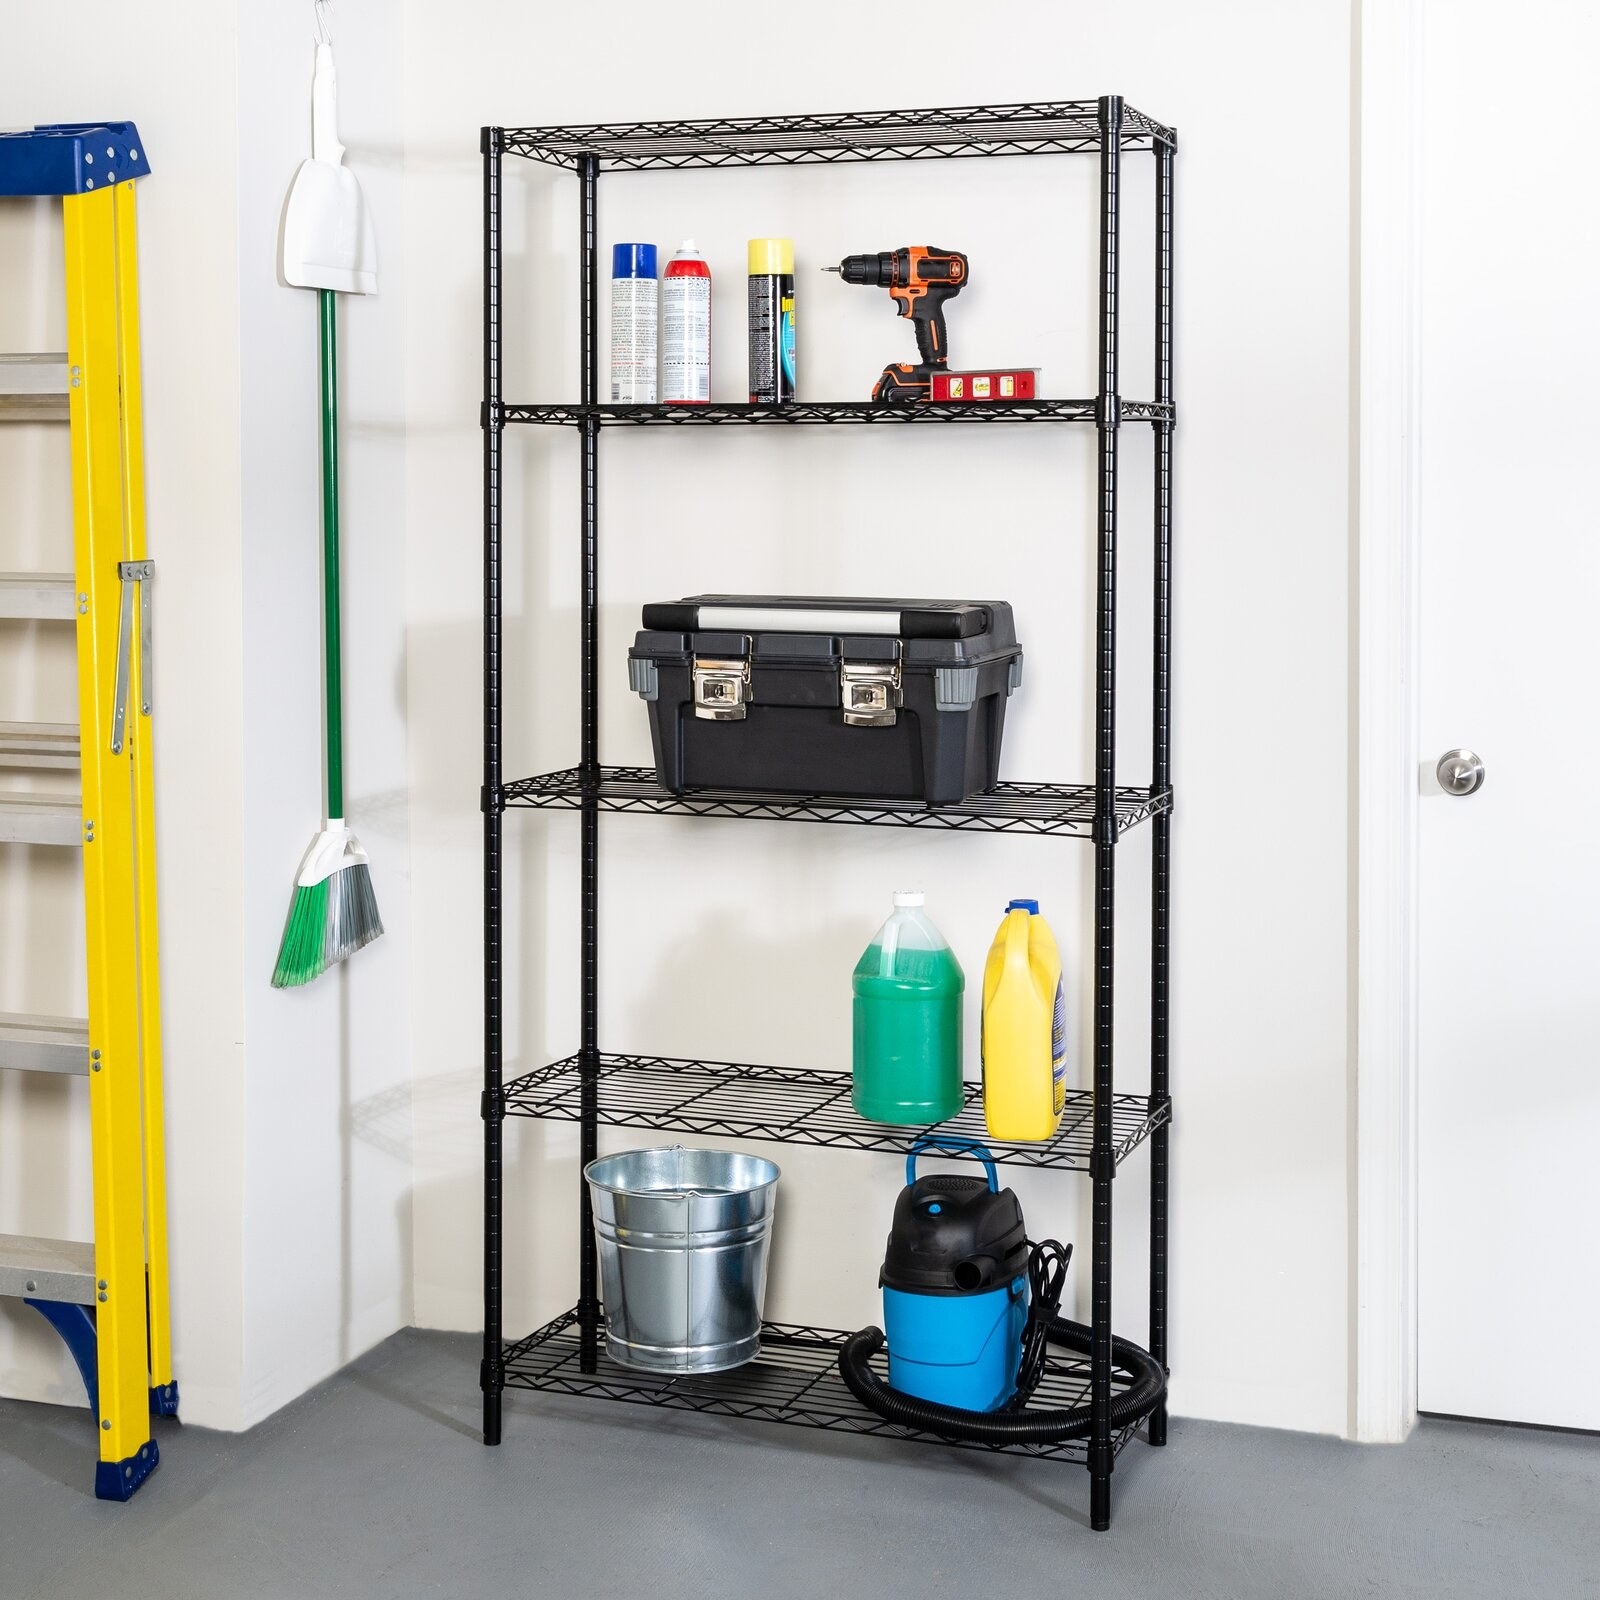 The black wire shelving unit